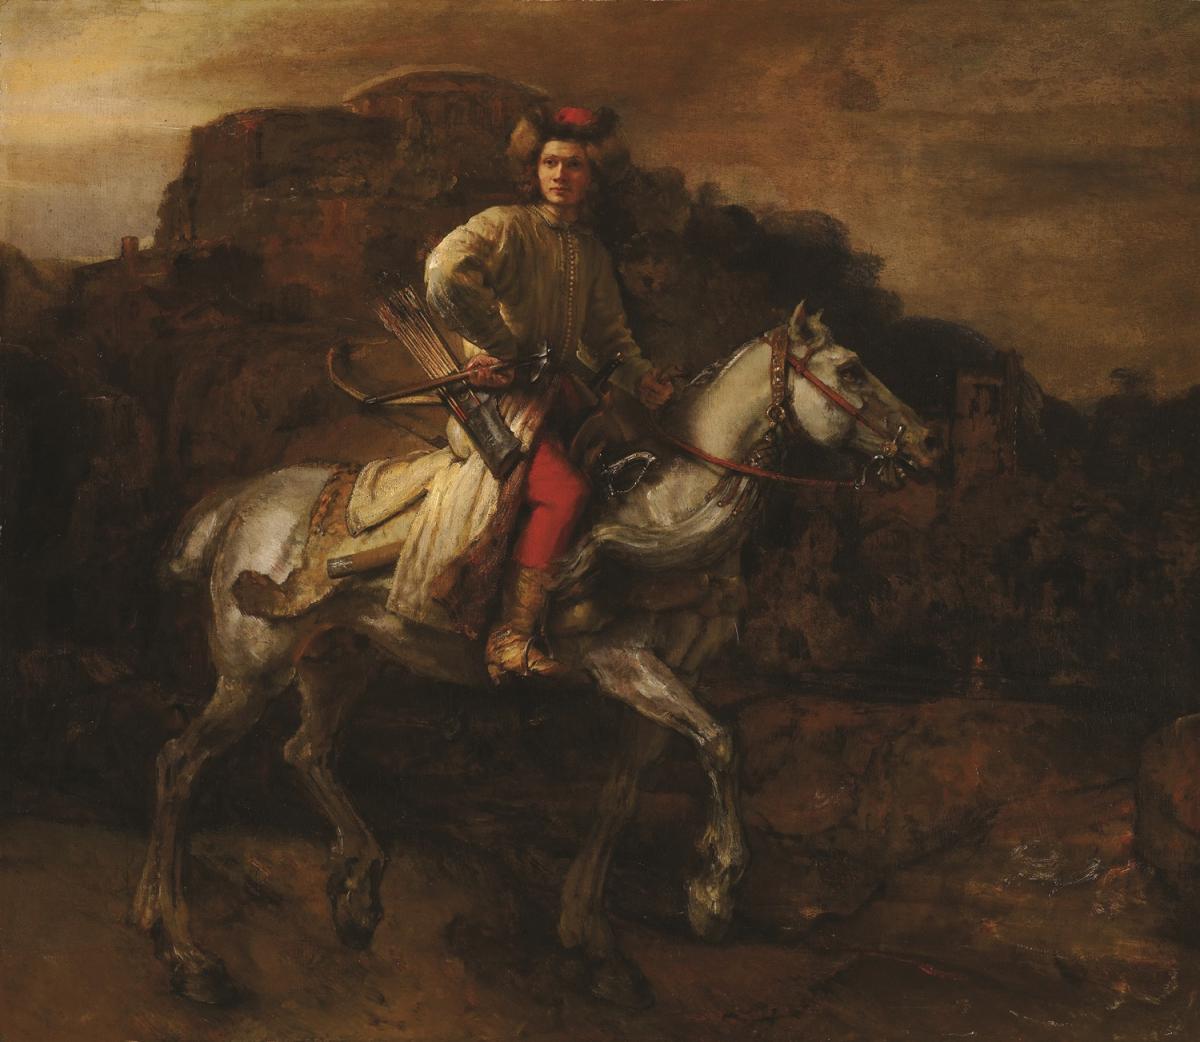 Oil painting of a man on a horse